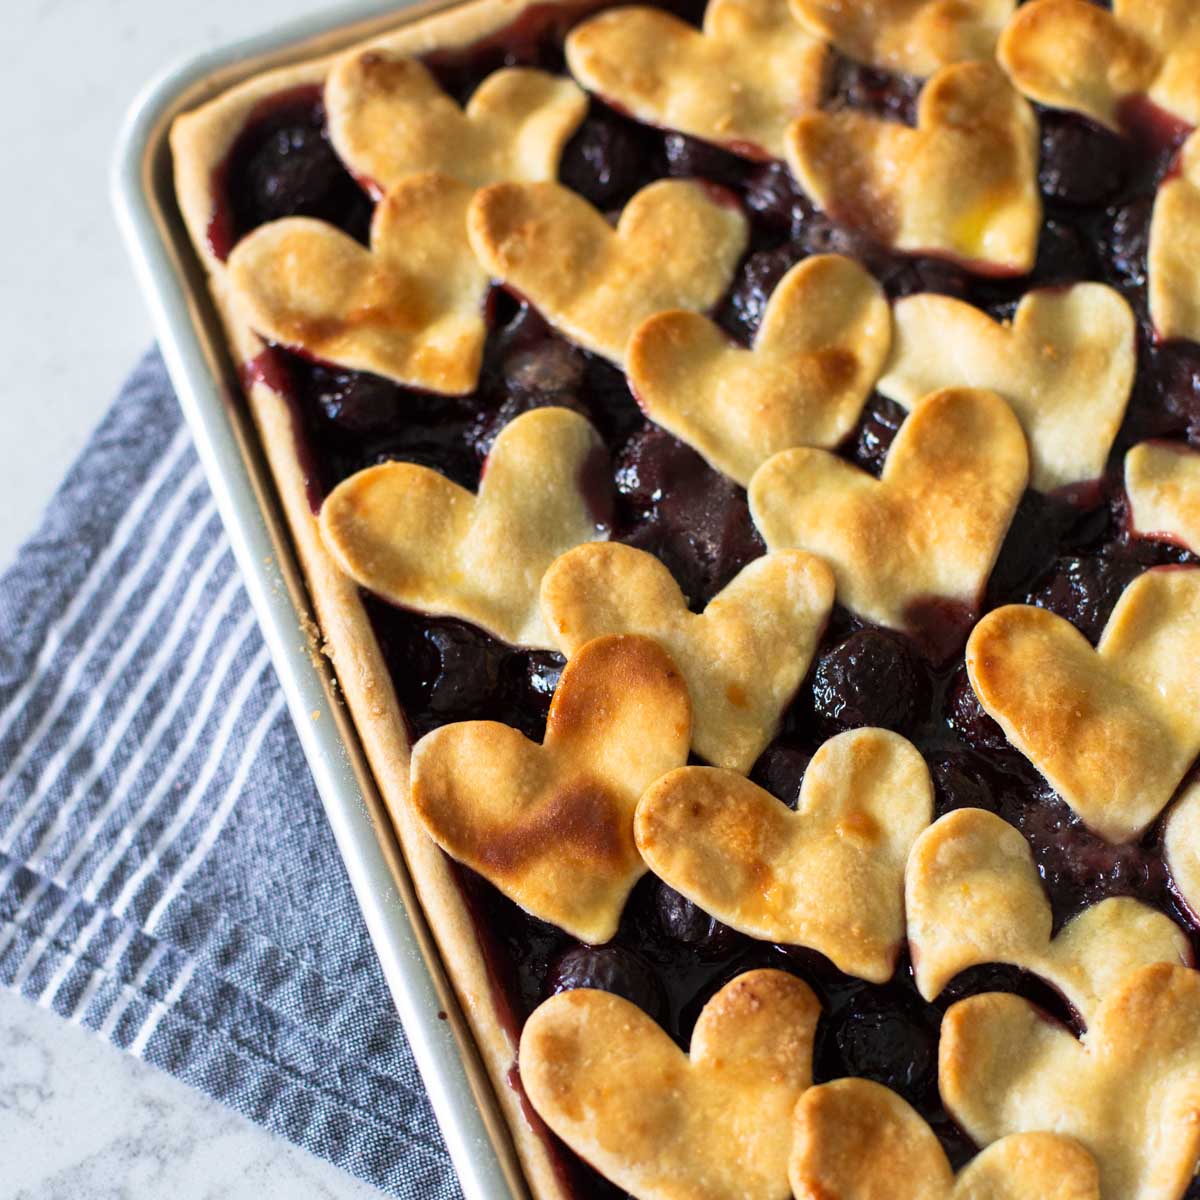 A cherry slab pie sits in a metal baking pan and has heart-shaped cut outs for the top crust.